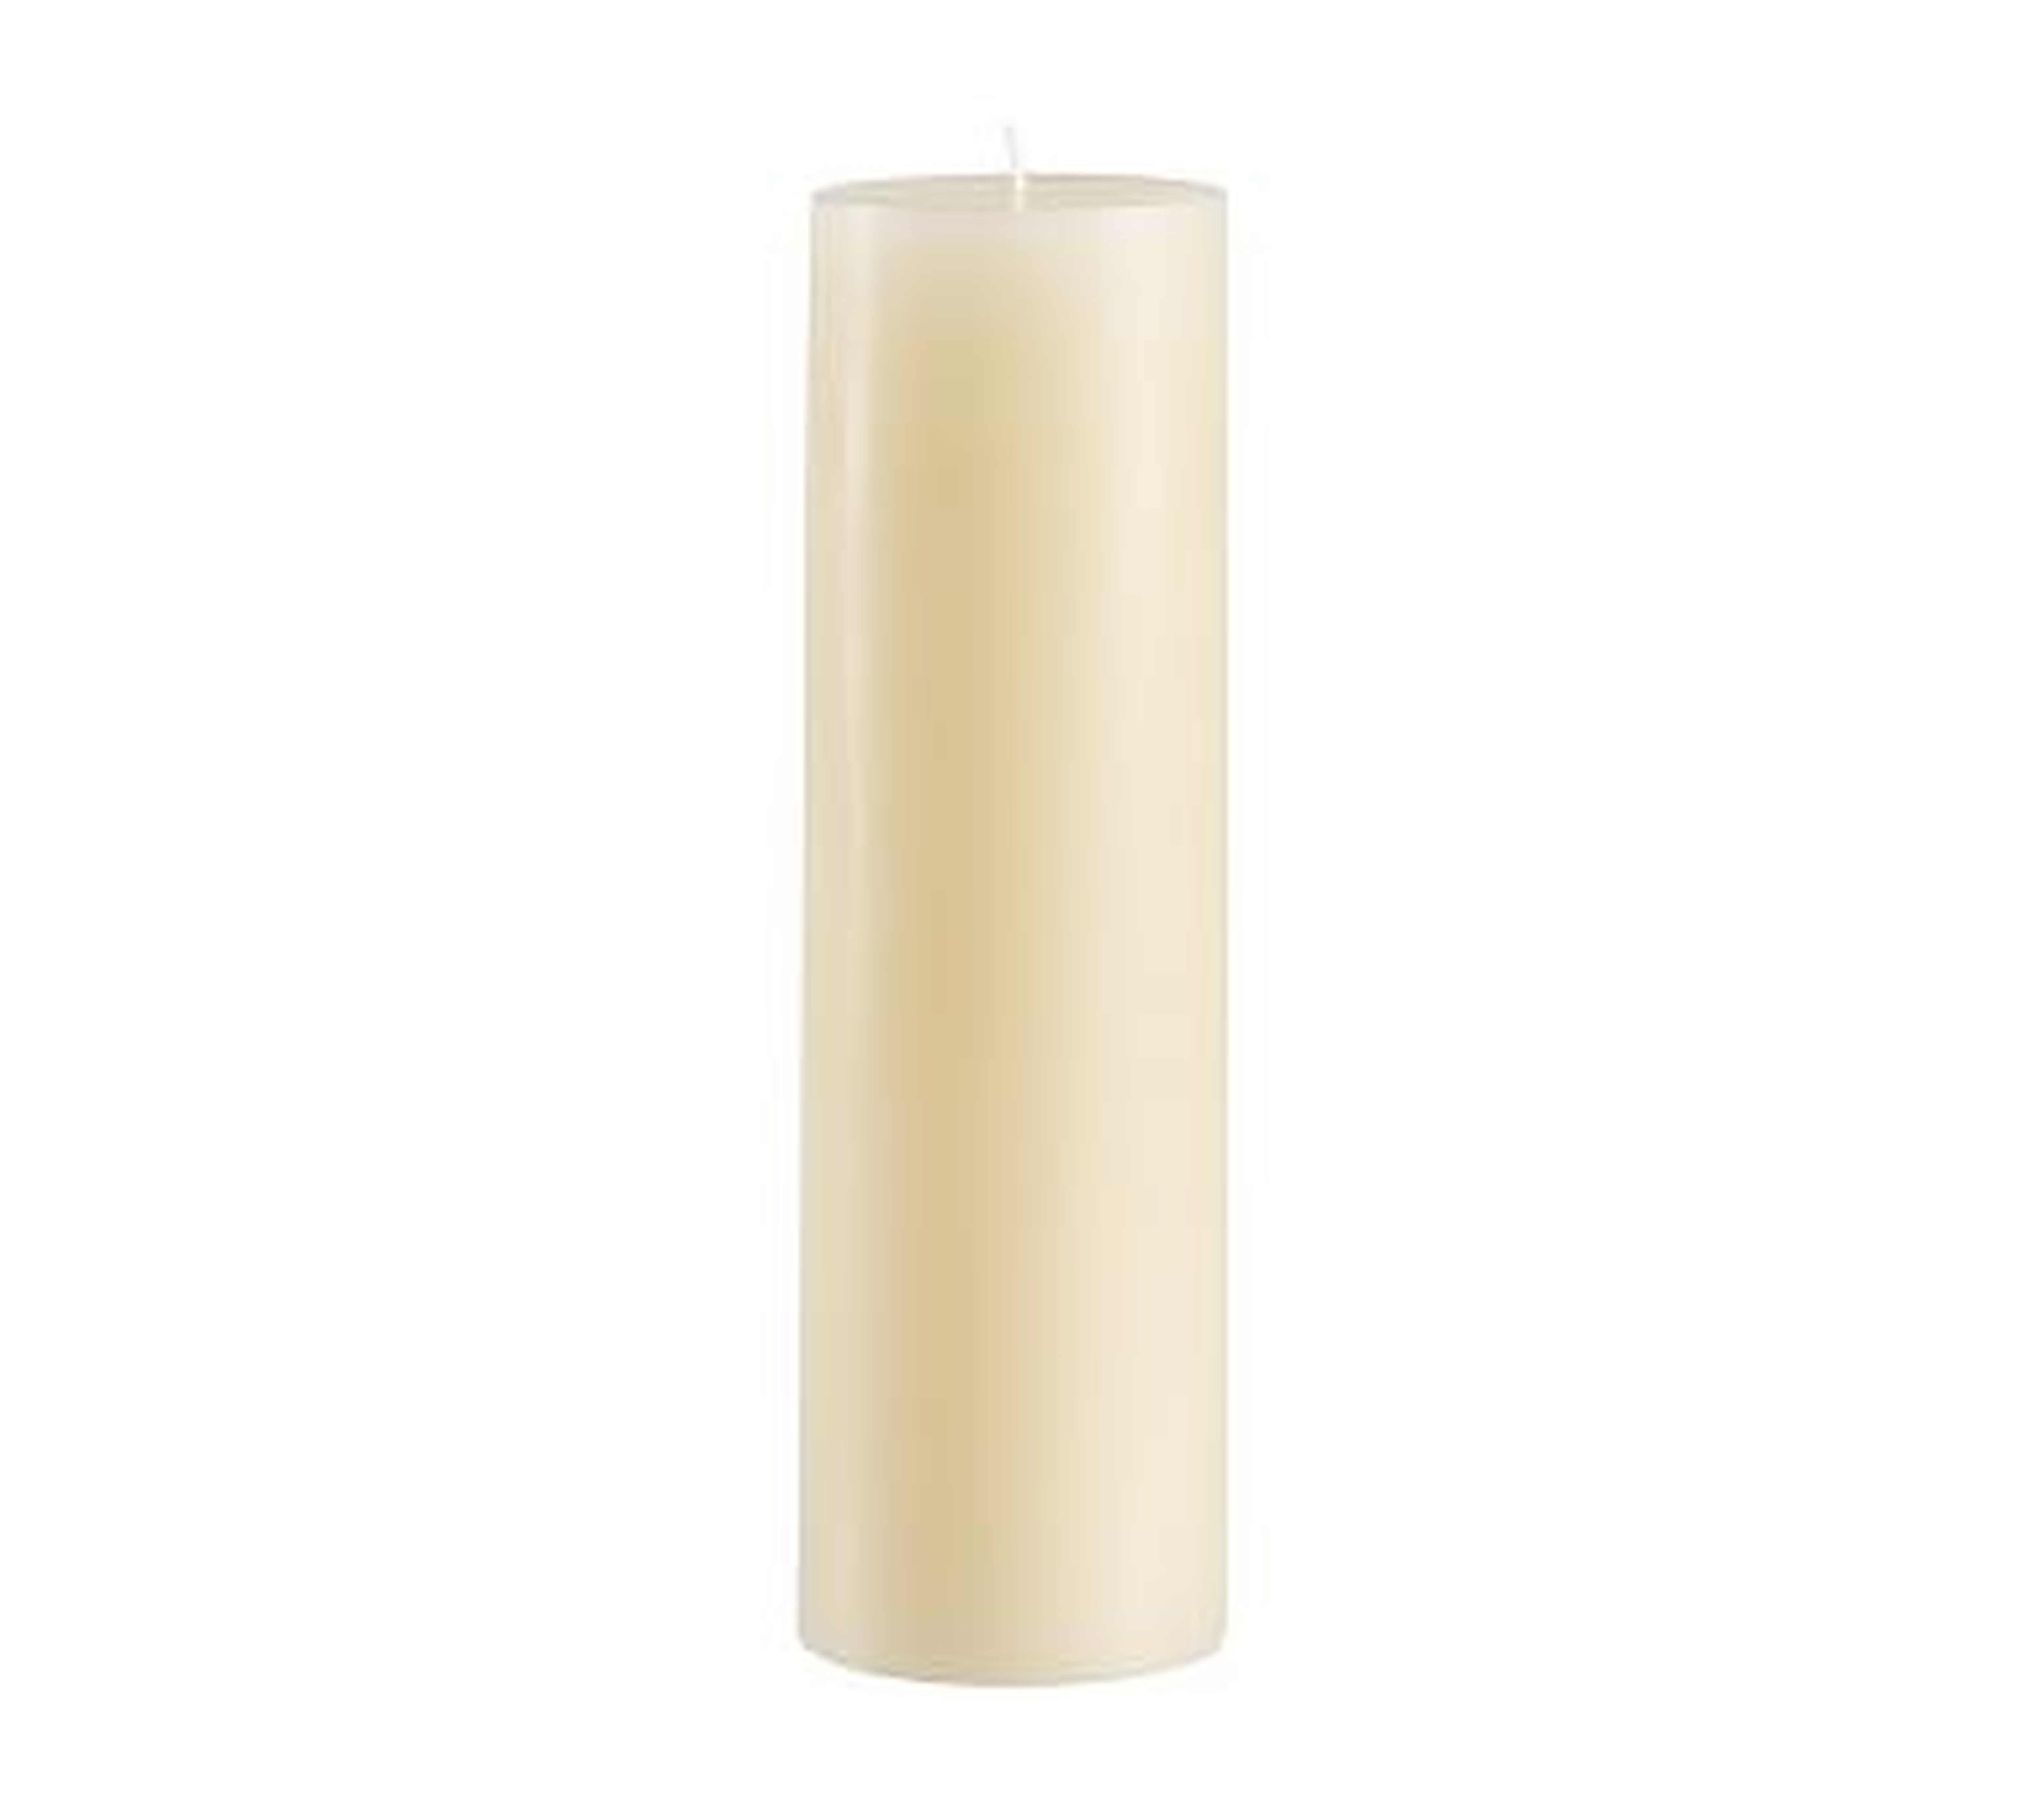 Unscented Pillar Candles, Ivory - 3 x 10" - Pottery Barn